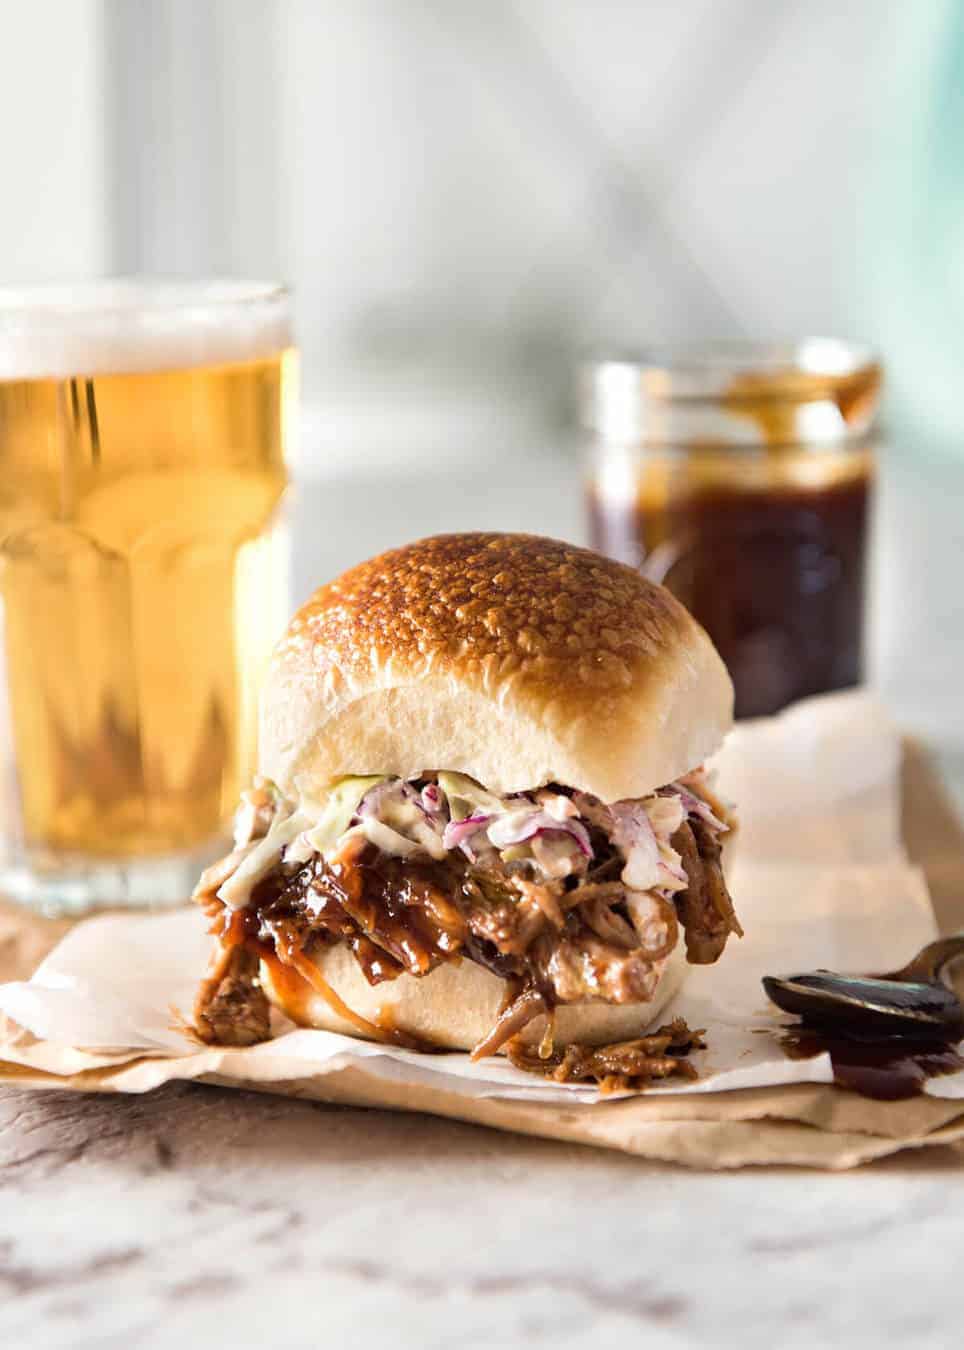 Slow Cooker BBQ Pulled Pork Sandwich - Perfectly seasoned, tender pulled pork tossed in a homemade BBQ sauce, piled onto bread with coleslaw. Slow cooker, pressure cooker or oven. www.recipetineats.com